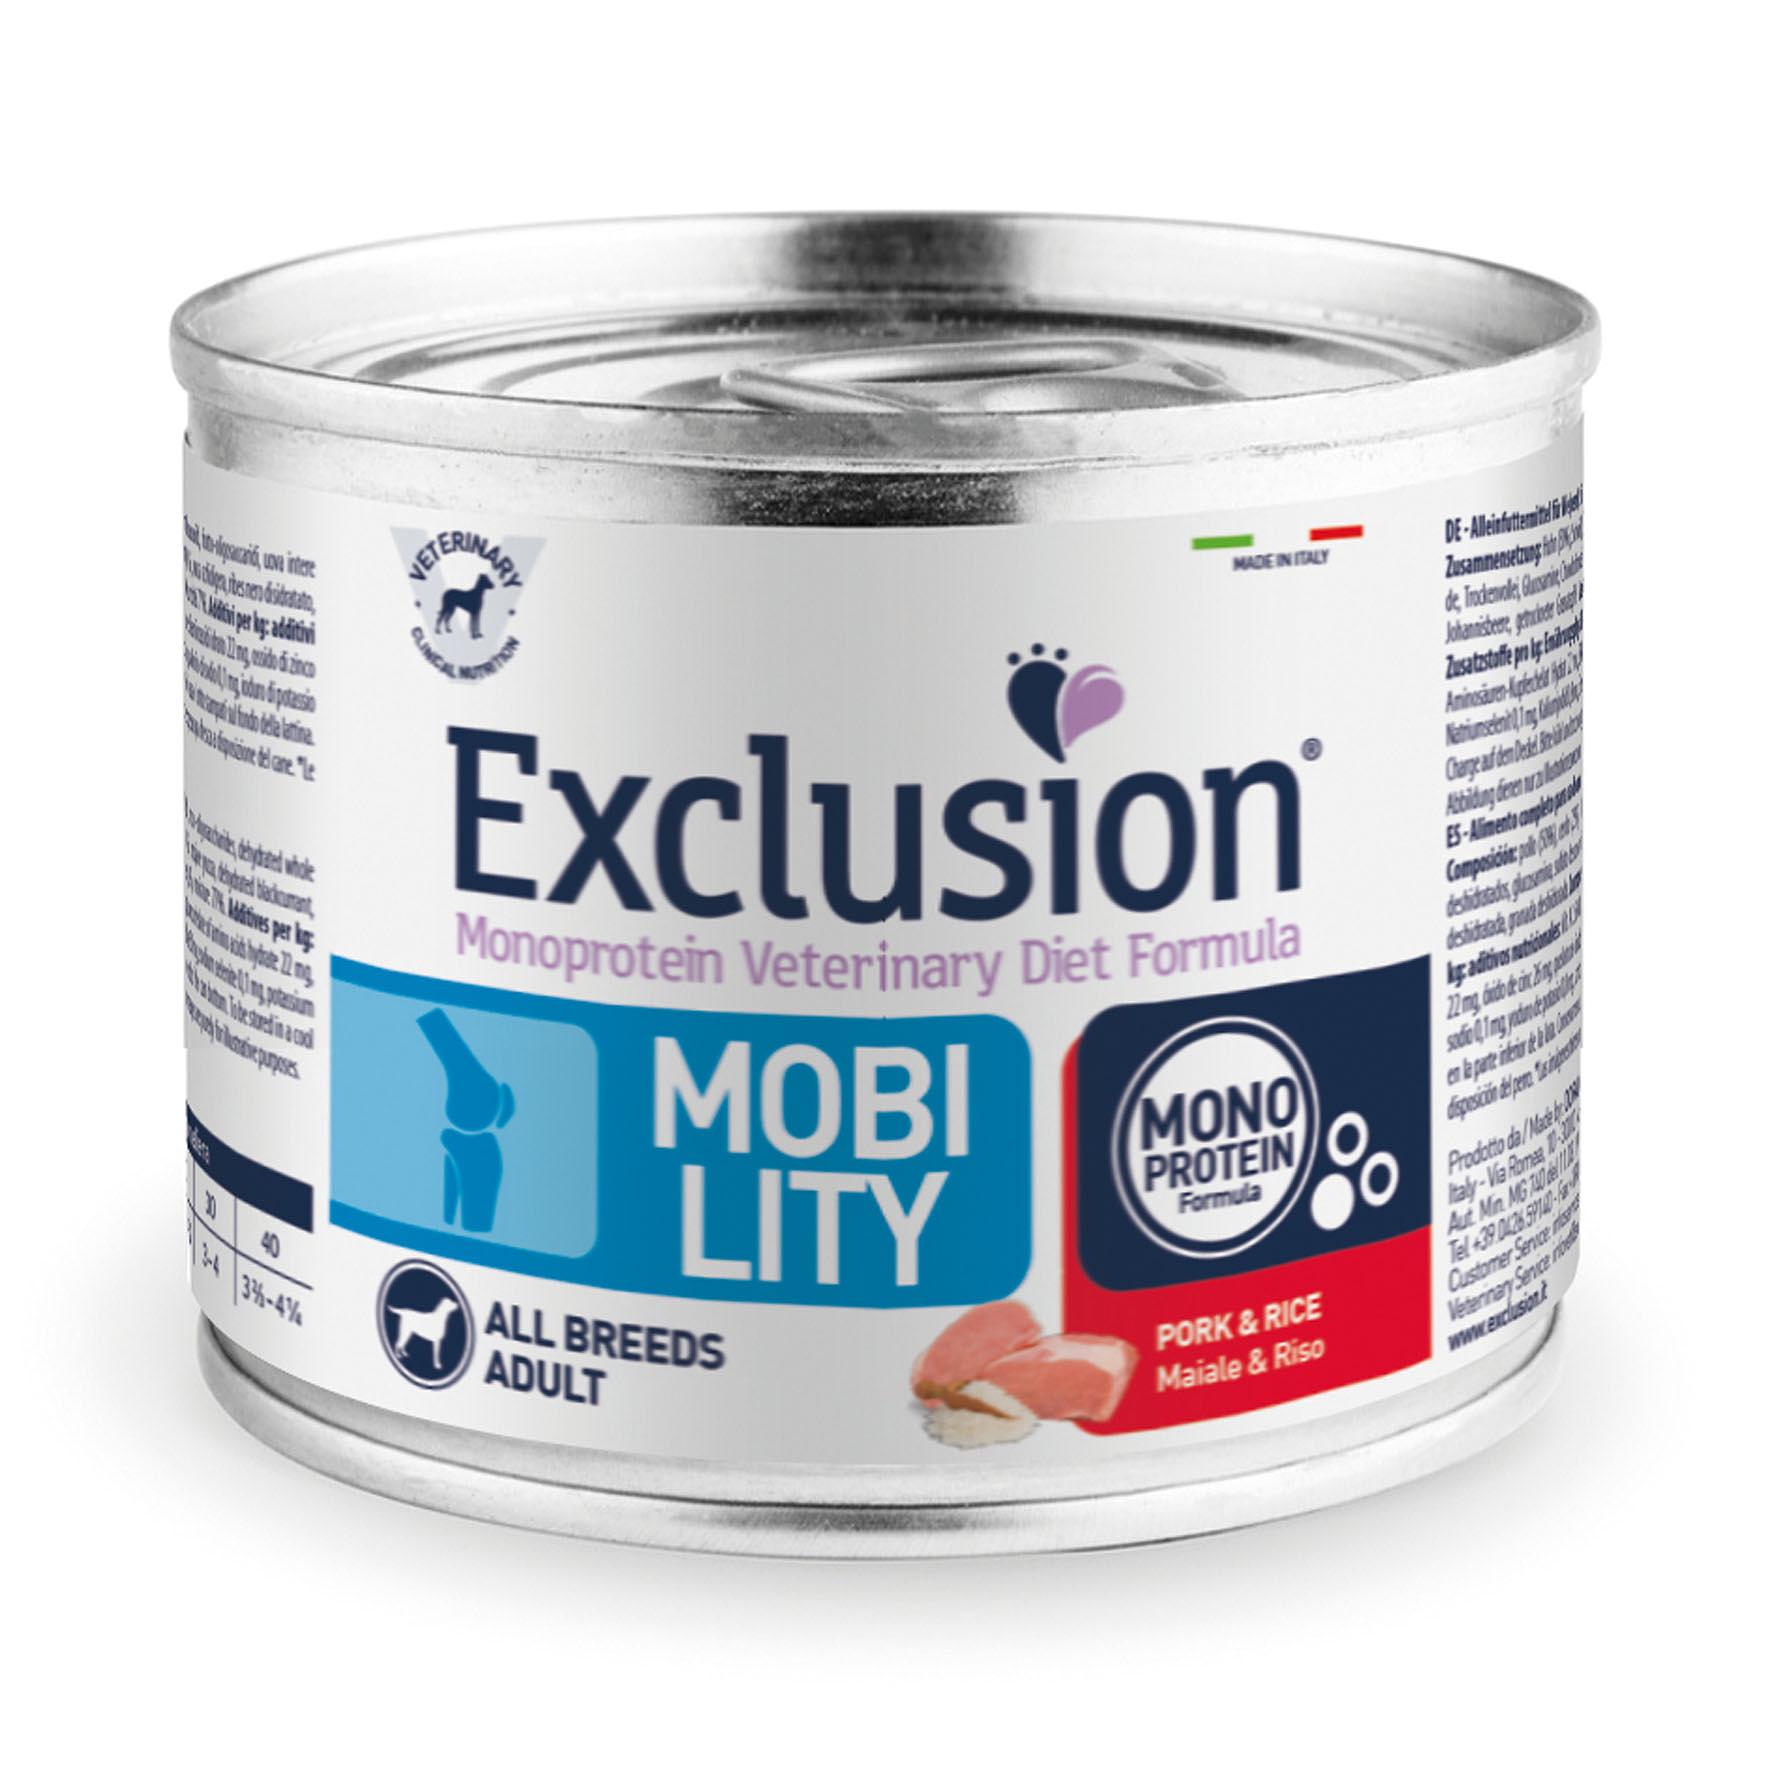 Exclusion Vet Mobility Adult All Breeds Pork